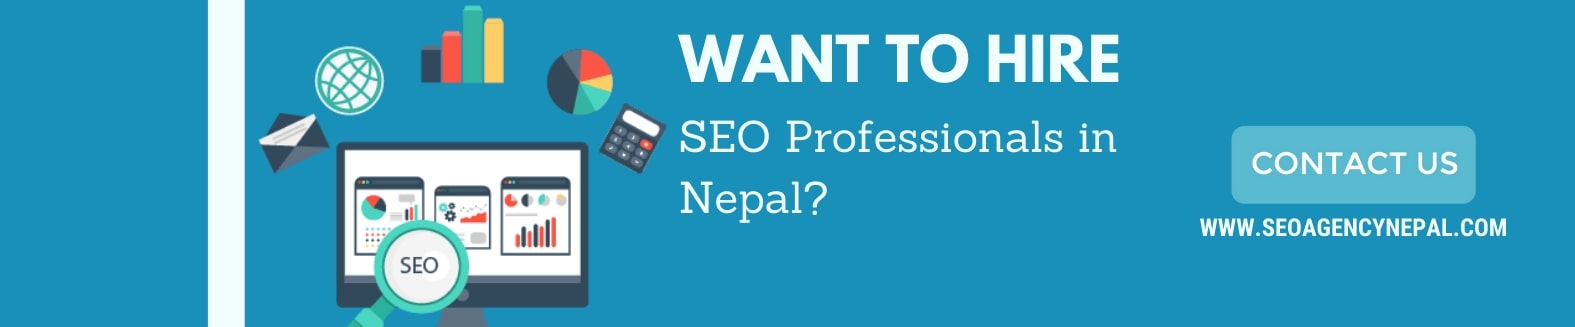 Want-to-hire-SEO-Professionals